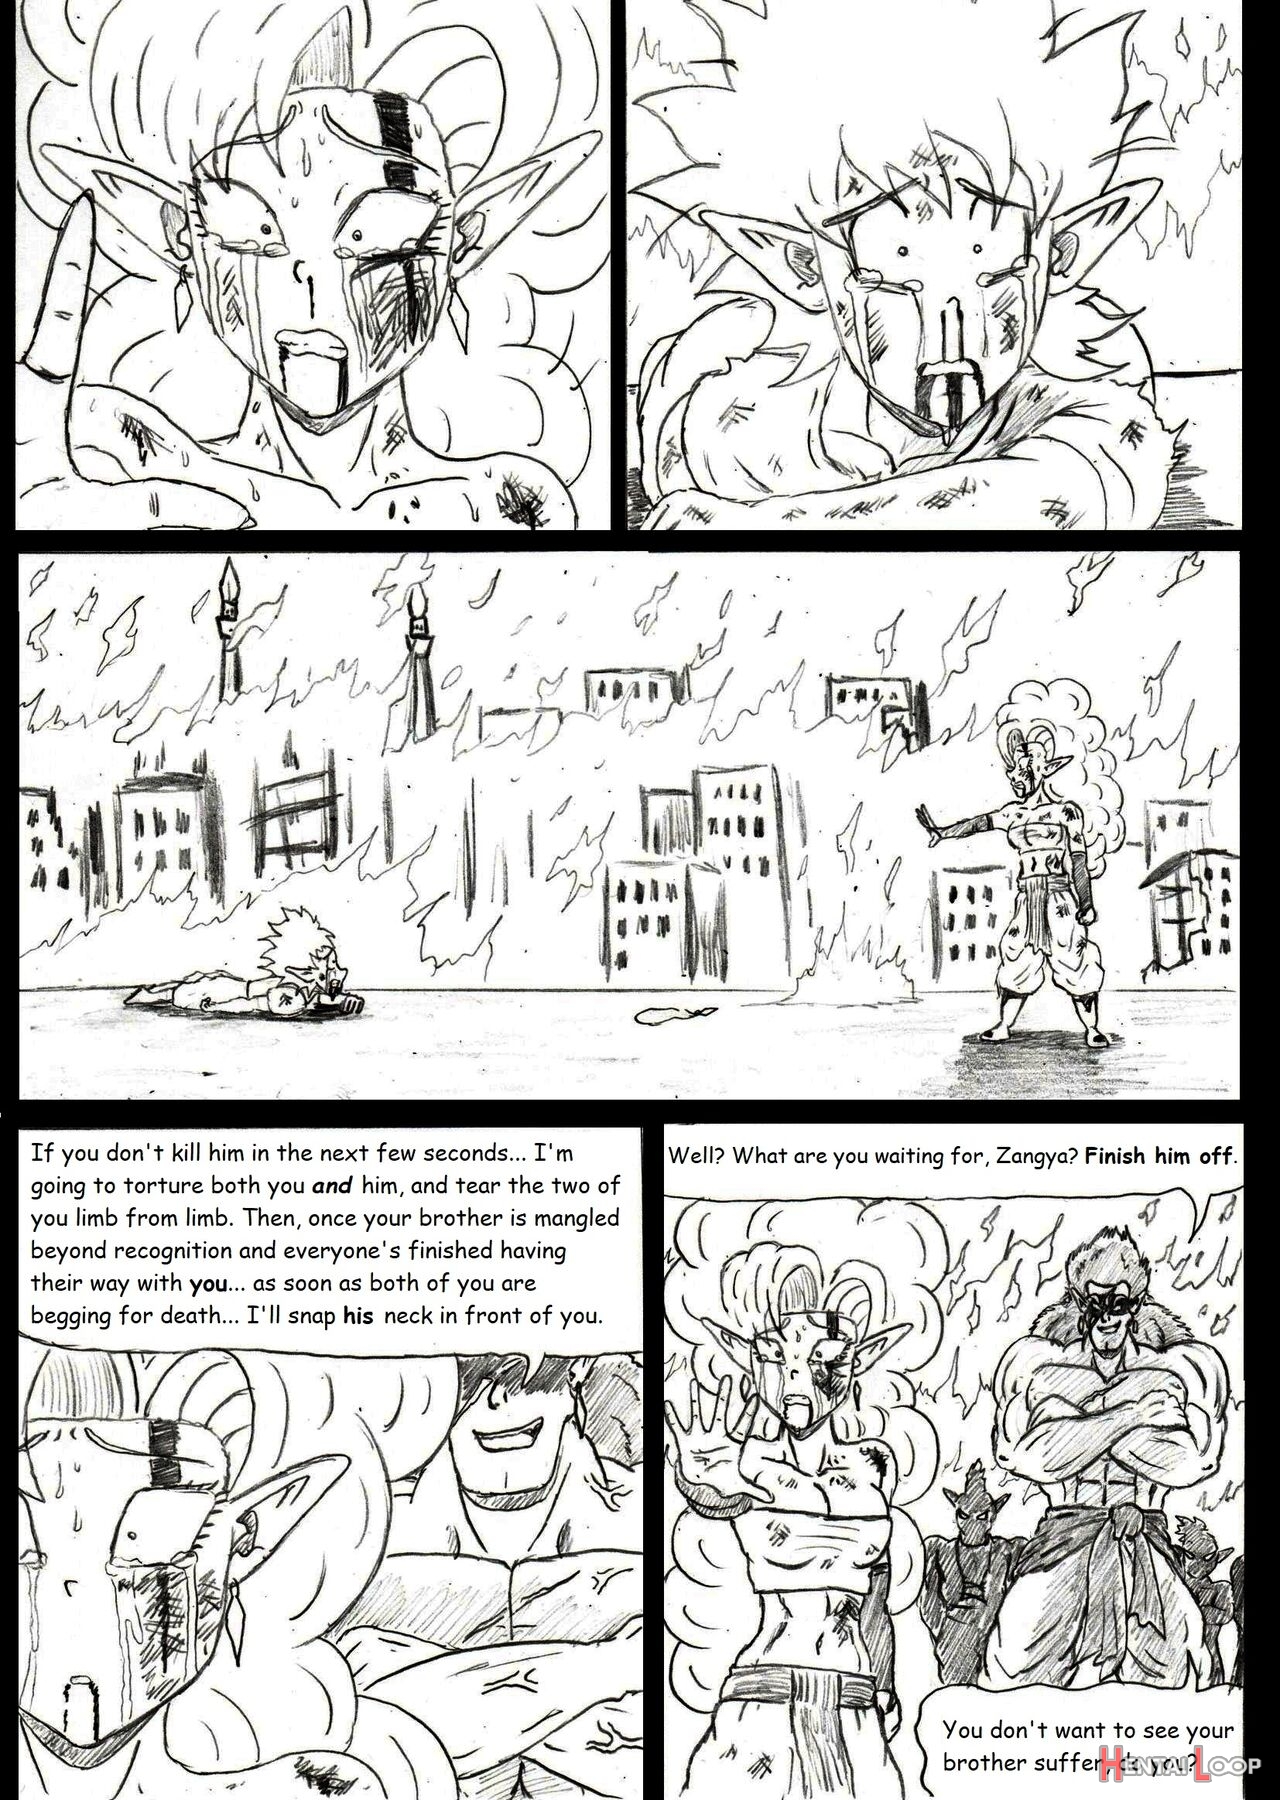 Dragonball Z Golden Age - Chapter 4 - The Galaxy Soldiers page 7